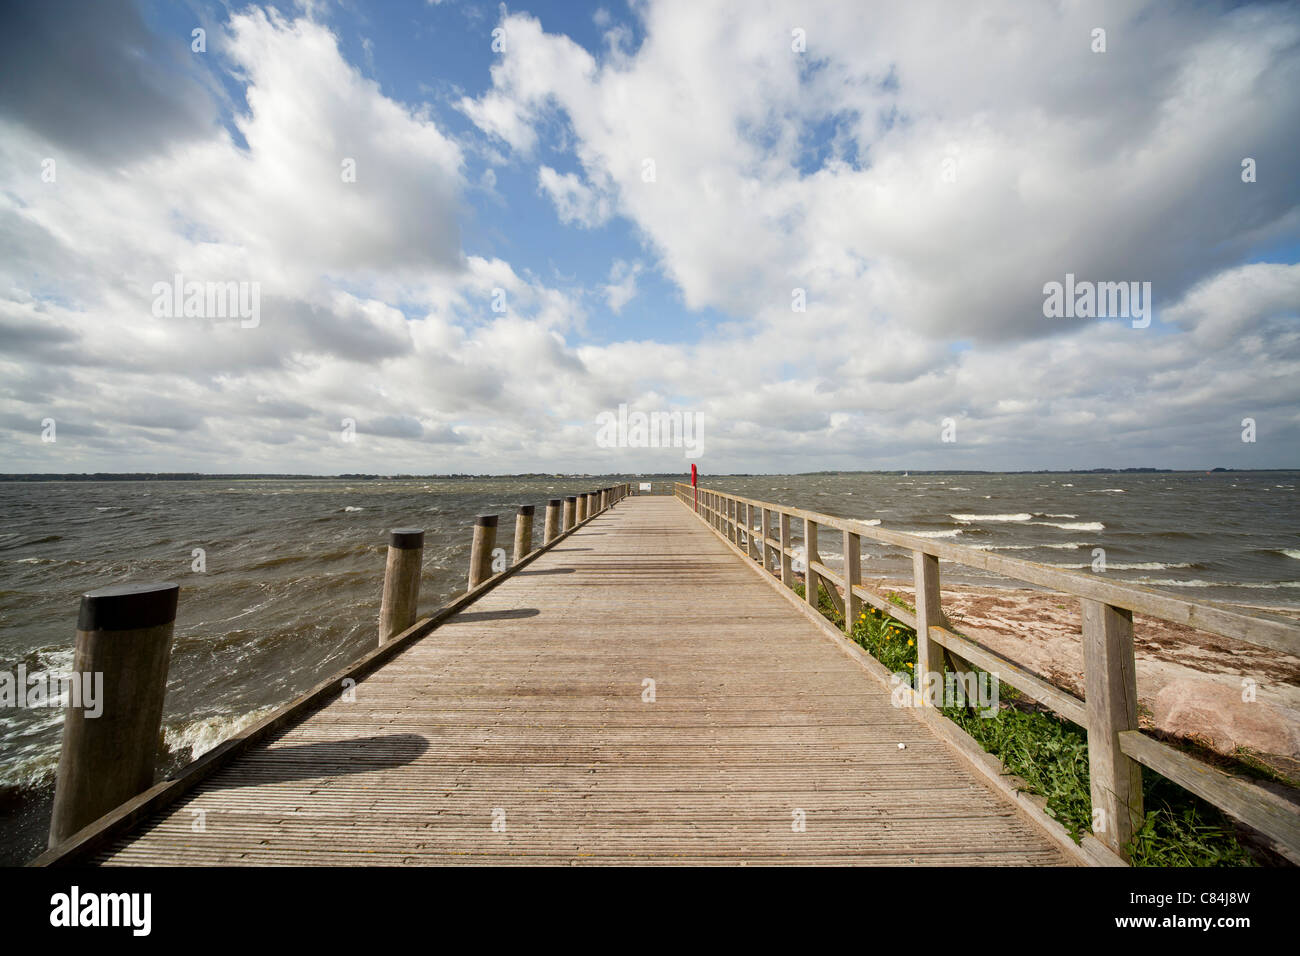 pier at the Bay of Greifswald, Hanseatic City of Greifswald, Mecklenburg-Vorpommern, Germany Stock Photo